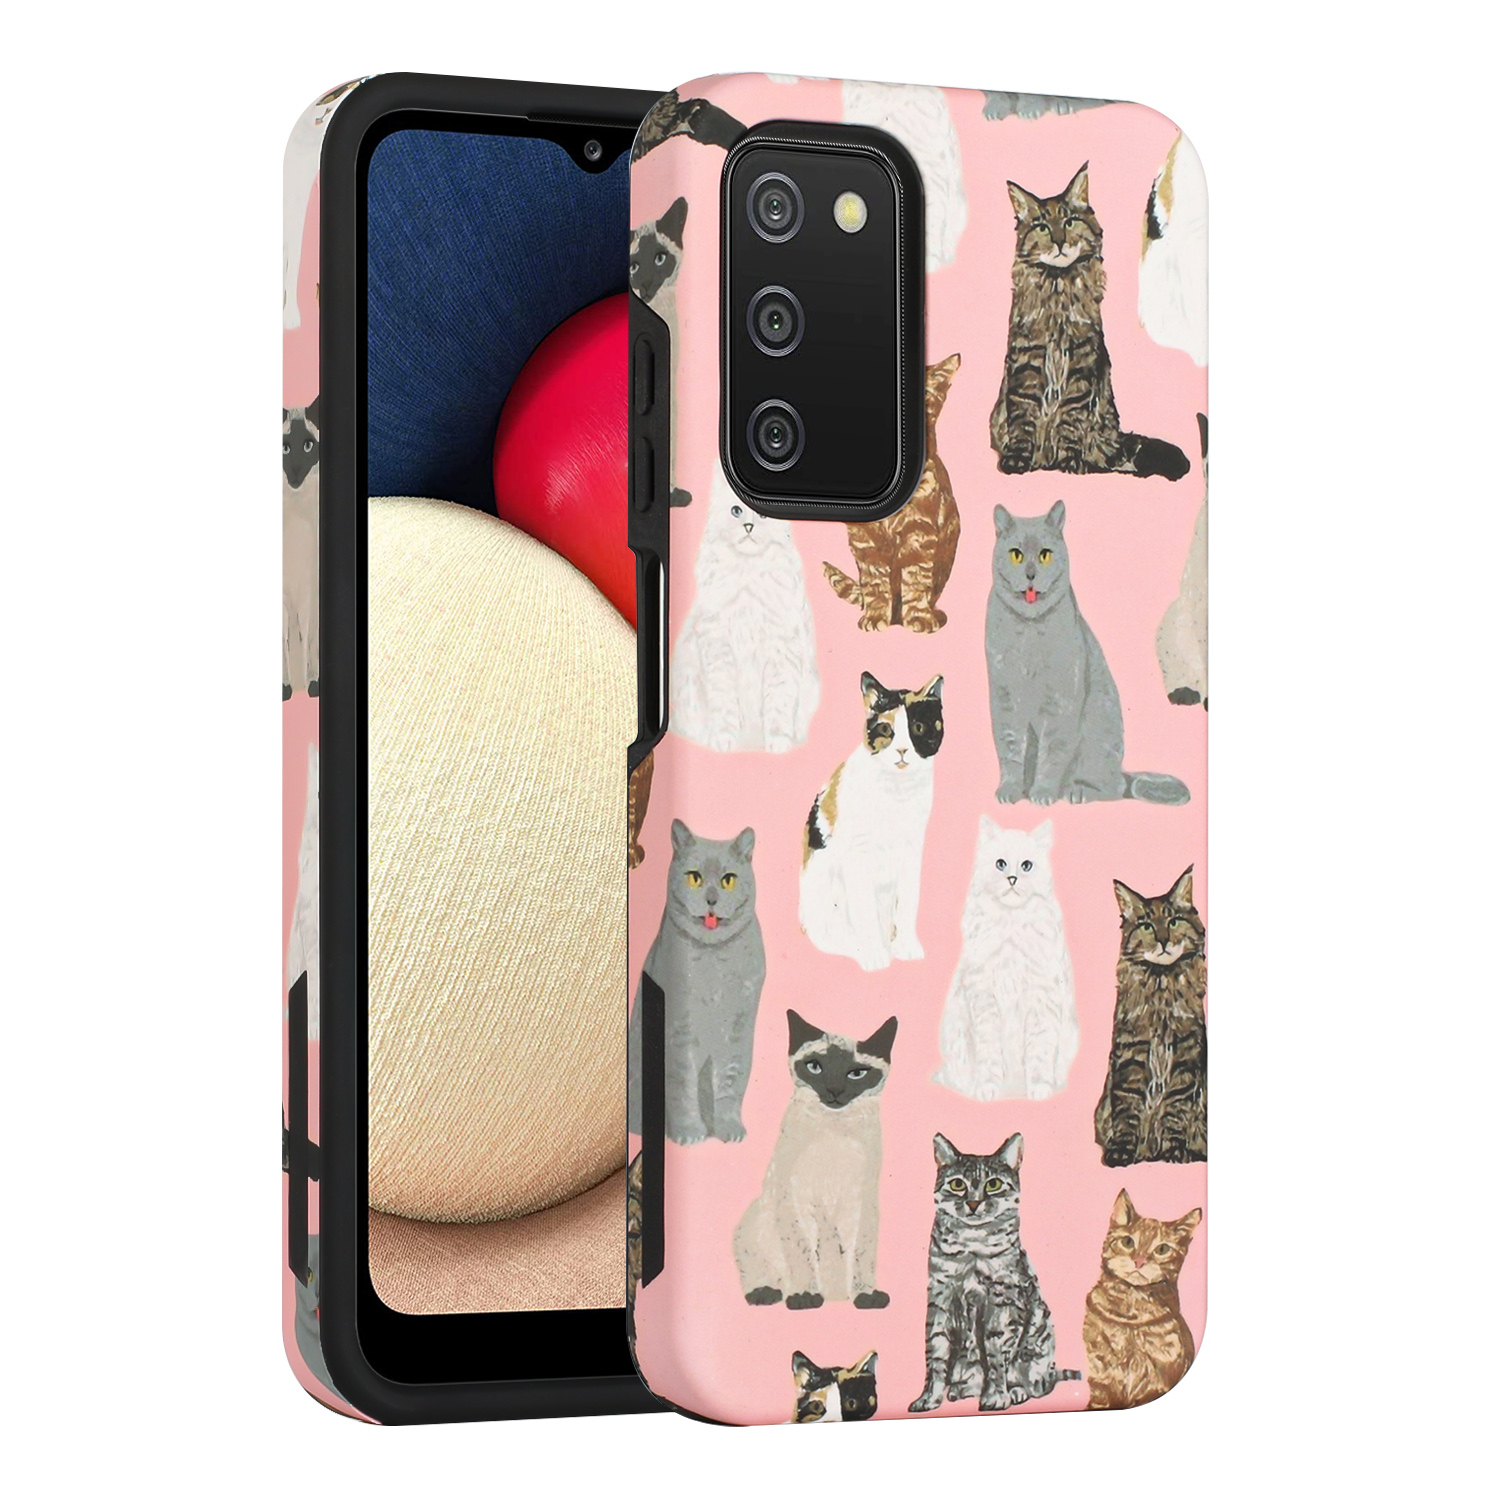 Glossy Design Dual Layer Armor Case Cover for Galaxy A03s (Cat)